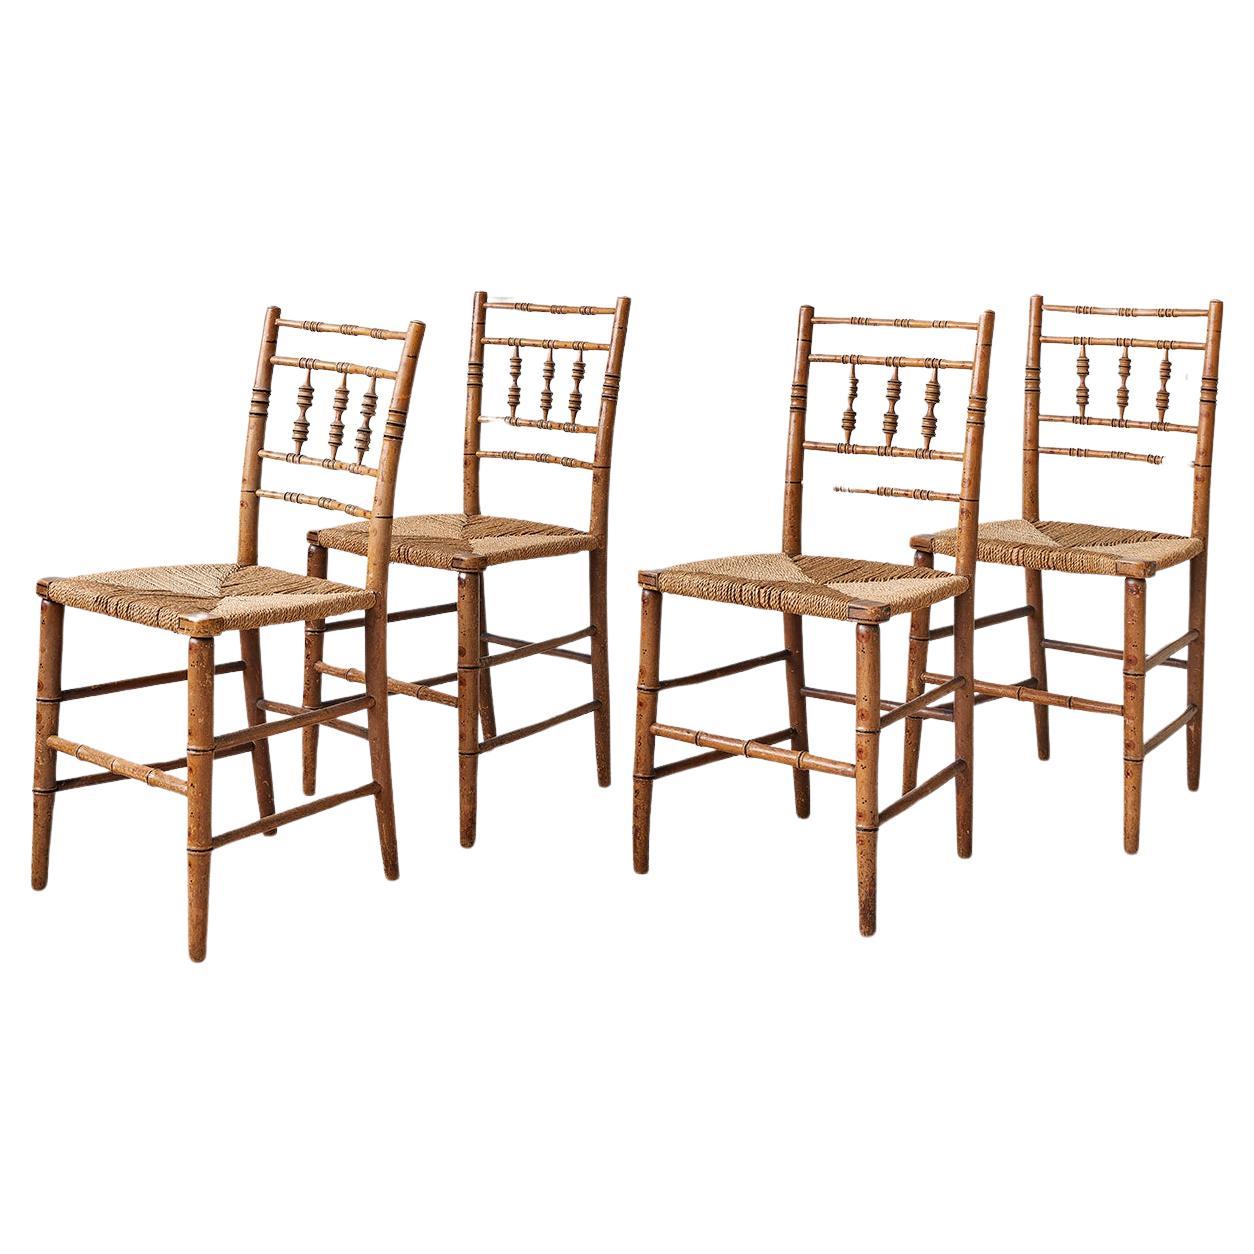 Antique Regency Faux Bamboo Side Chairs, Set of 4, England, Early 19th Century For Sale